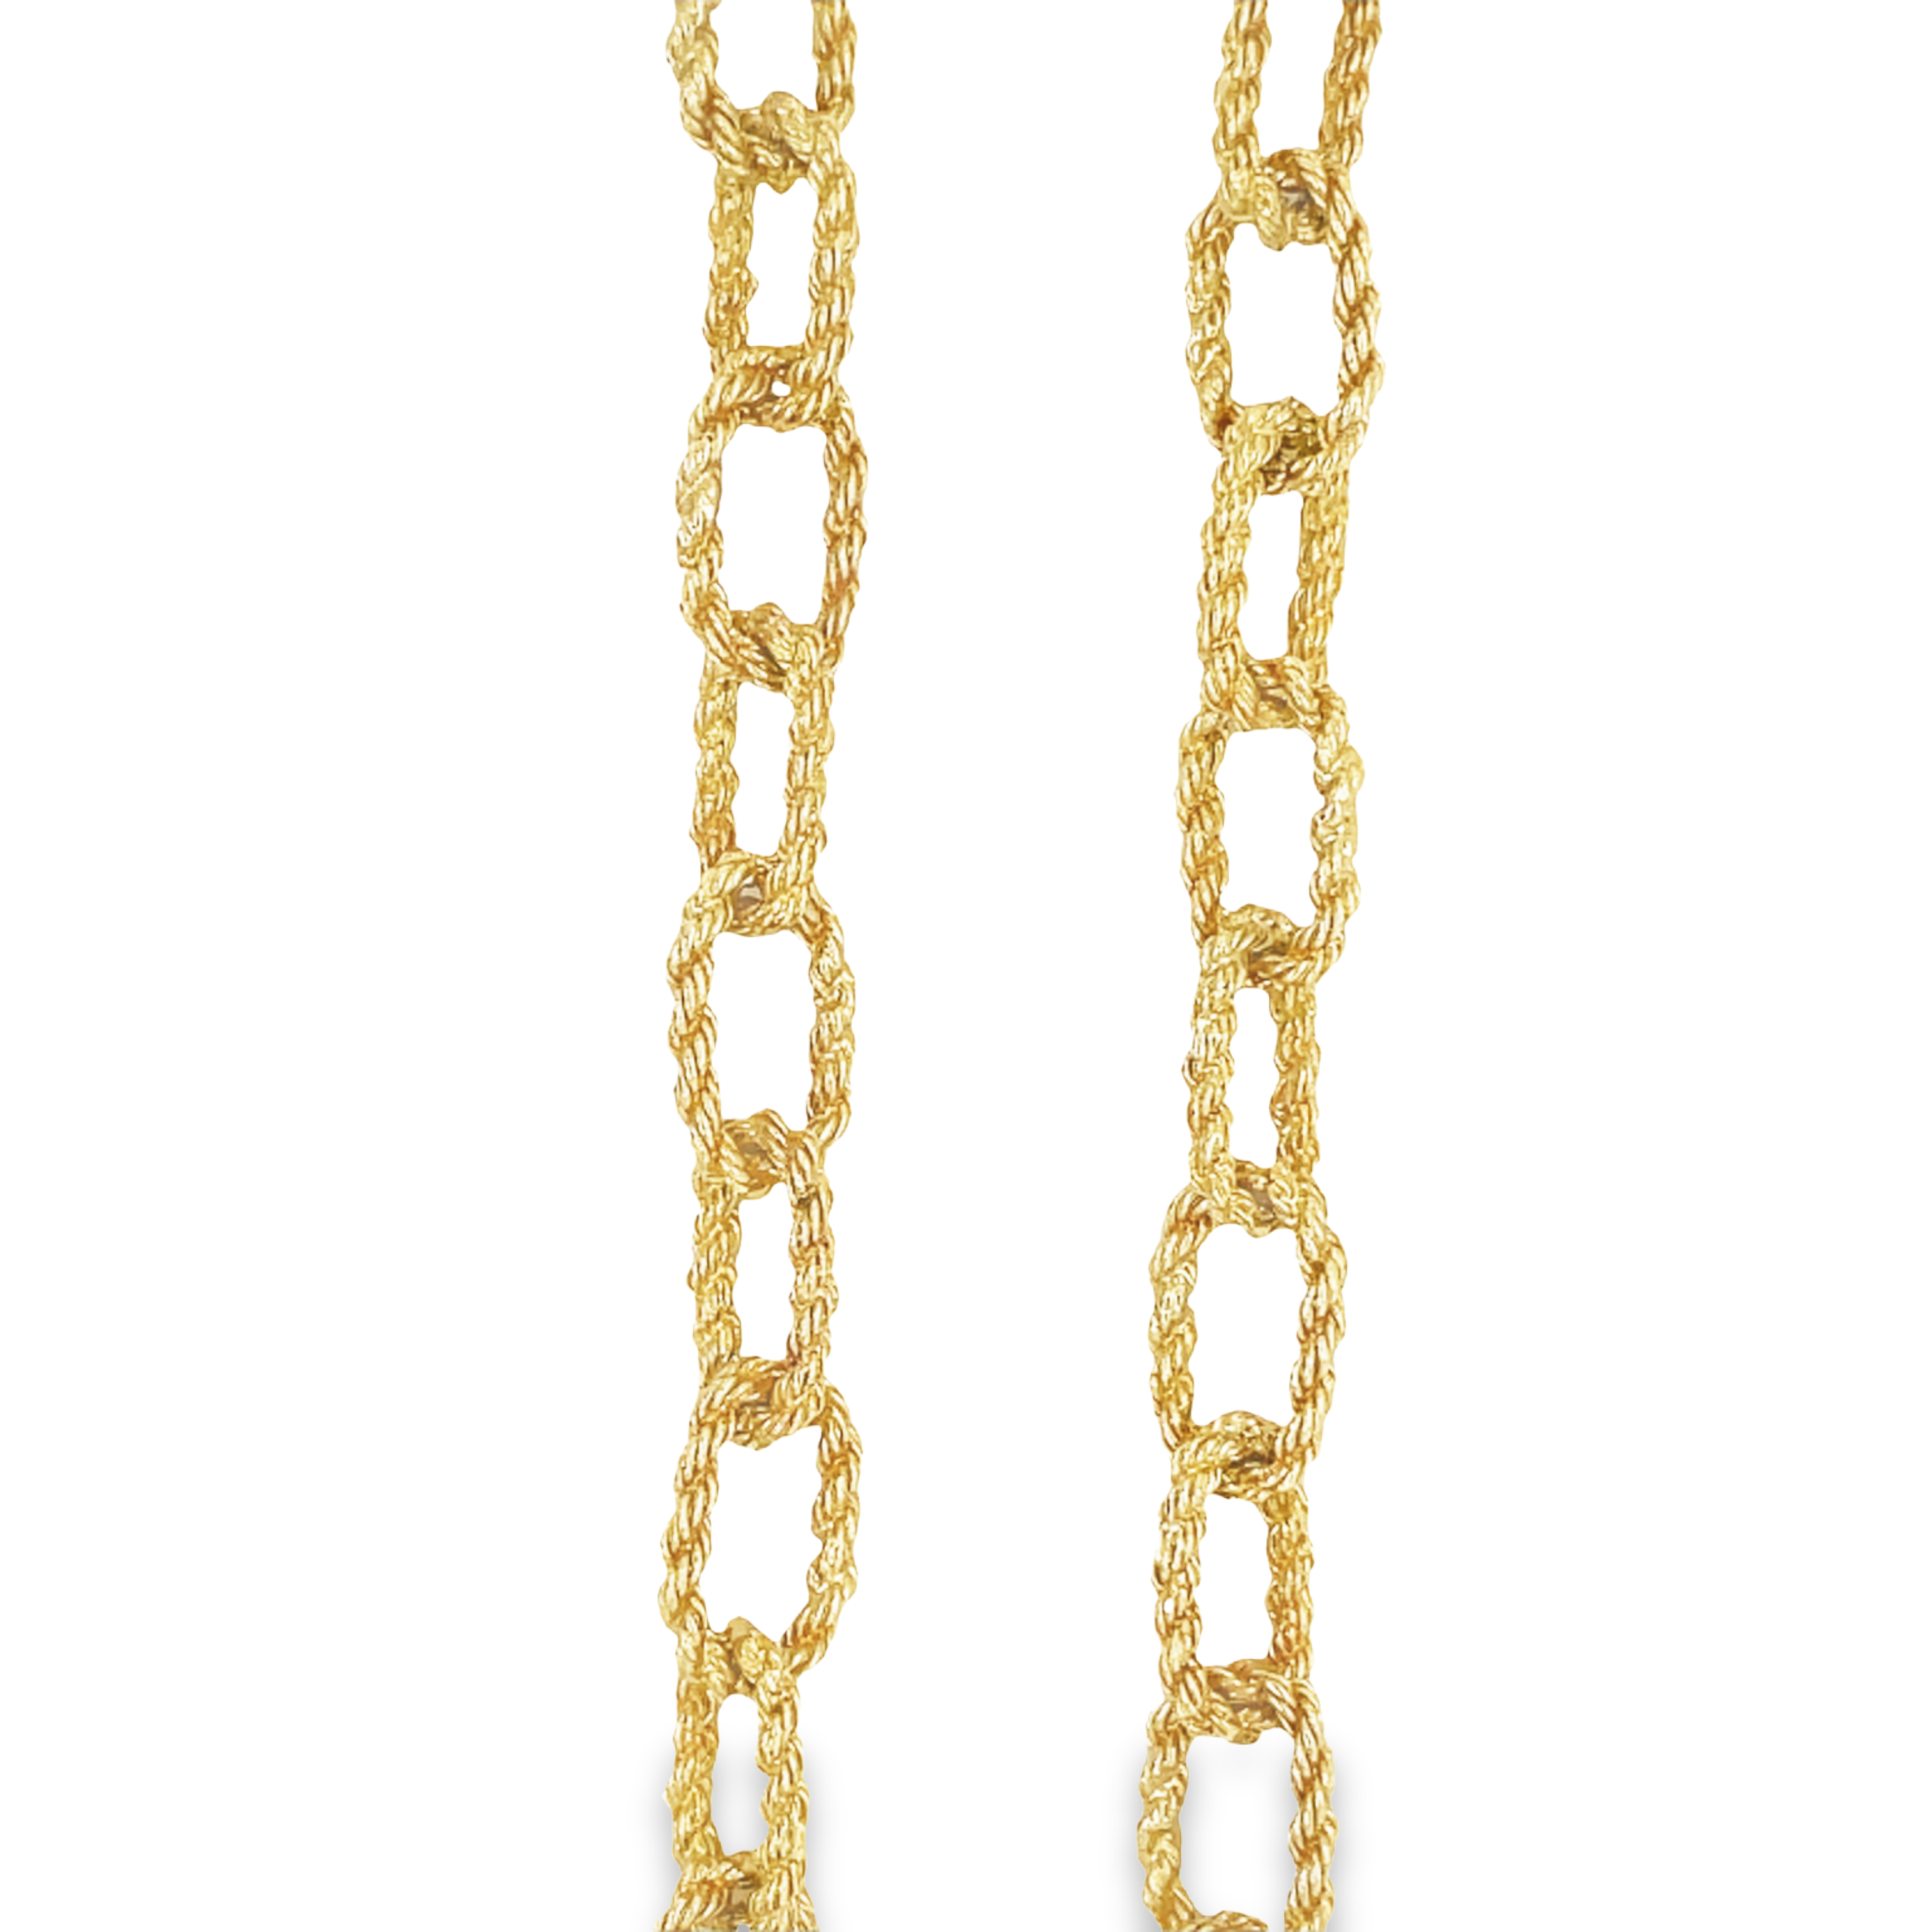 Add a classic and timeless look to your wardrobe with this 14k long rope chain link necklace. This 34" necklace is crafted from 14k yellow gold and gives off a matte finish. Its design is simple yet sophisticated, and it’s sure to be a staple in your jewelry collection.